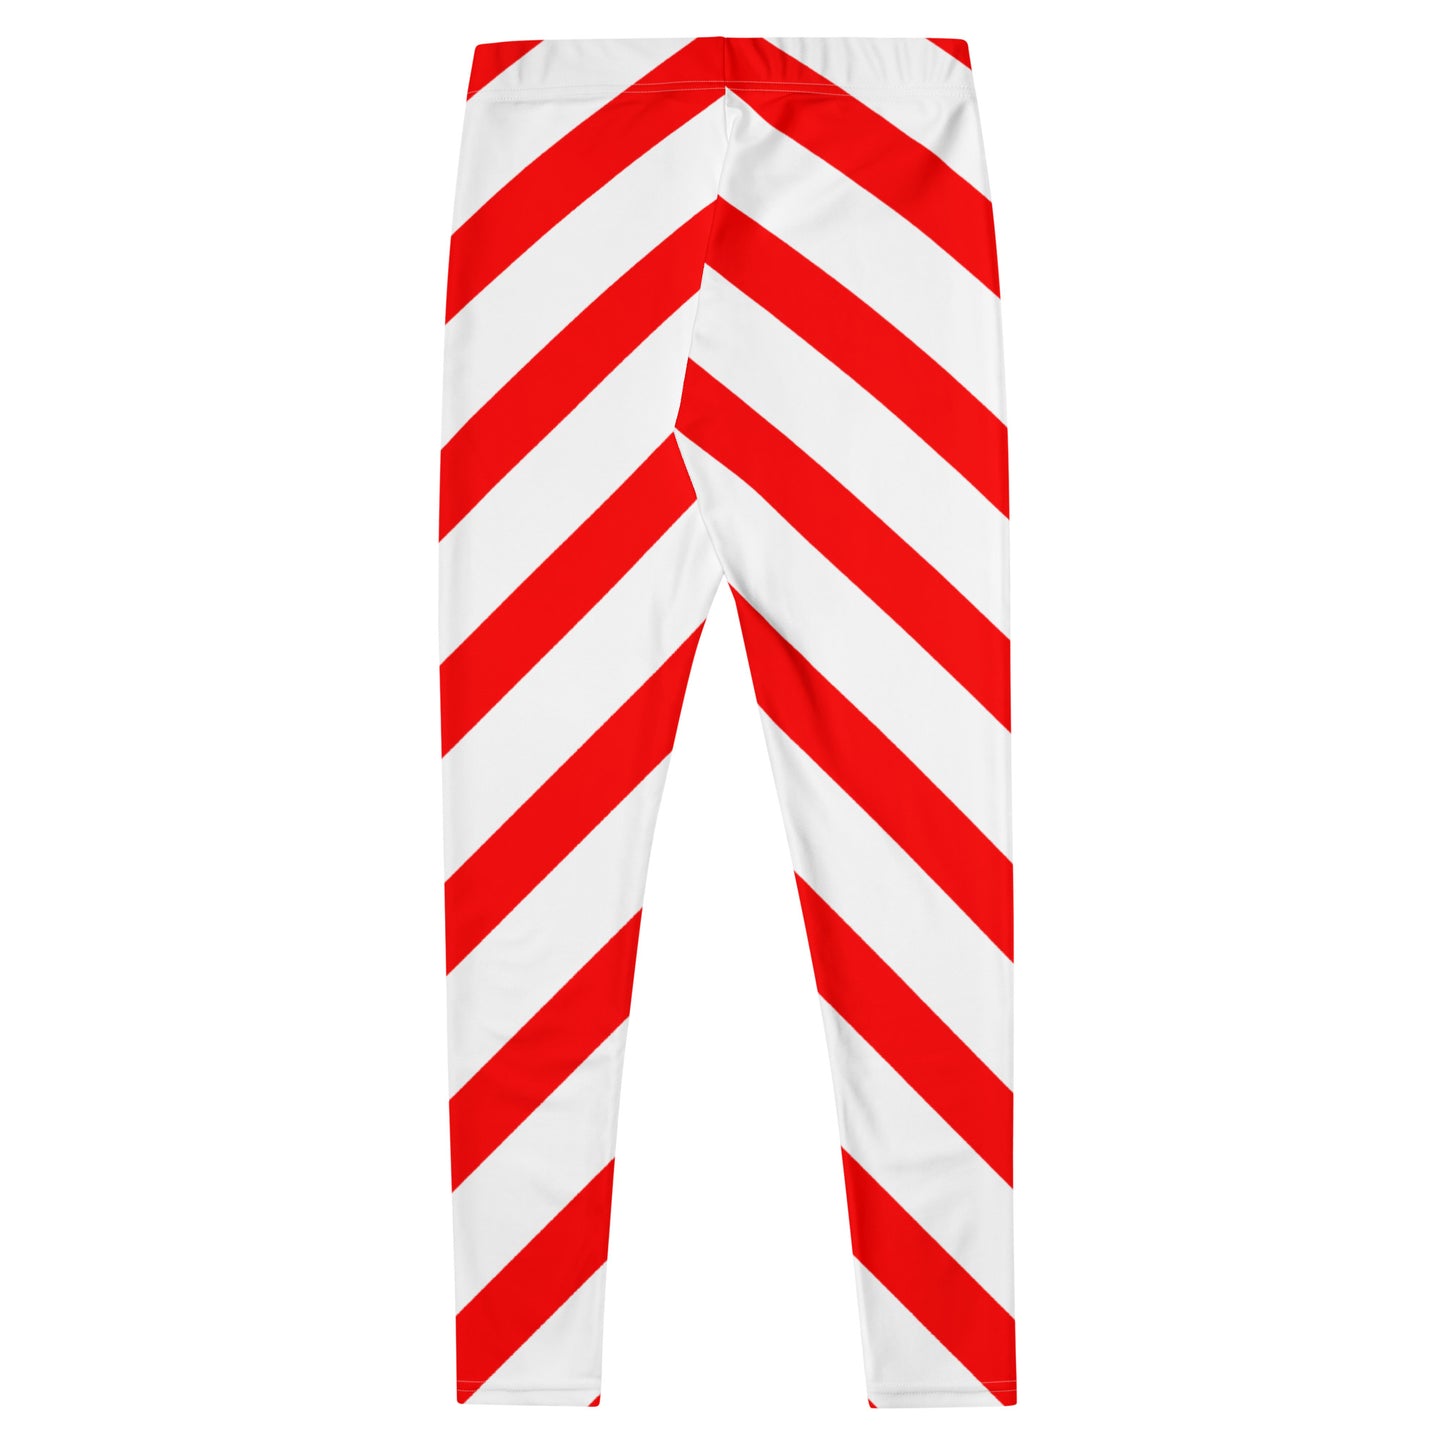 Candy Cane Leggings Women, Red White Striped Printed Yoga Pants Holiday Christmas Workout Fun Designer Tights Starcove Fashion